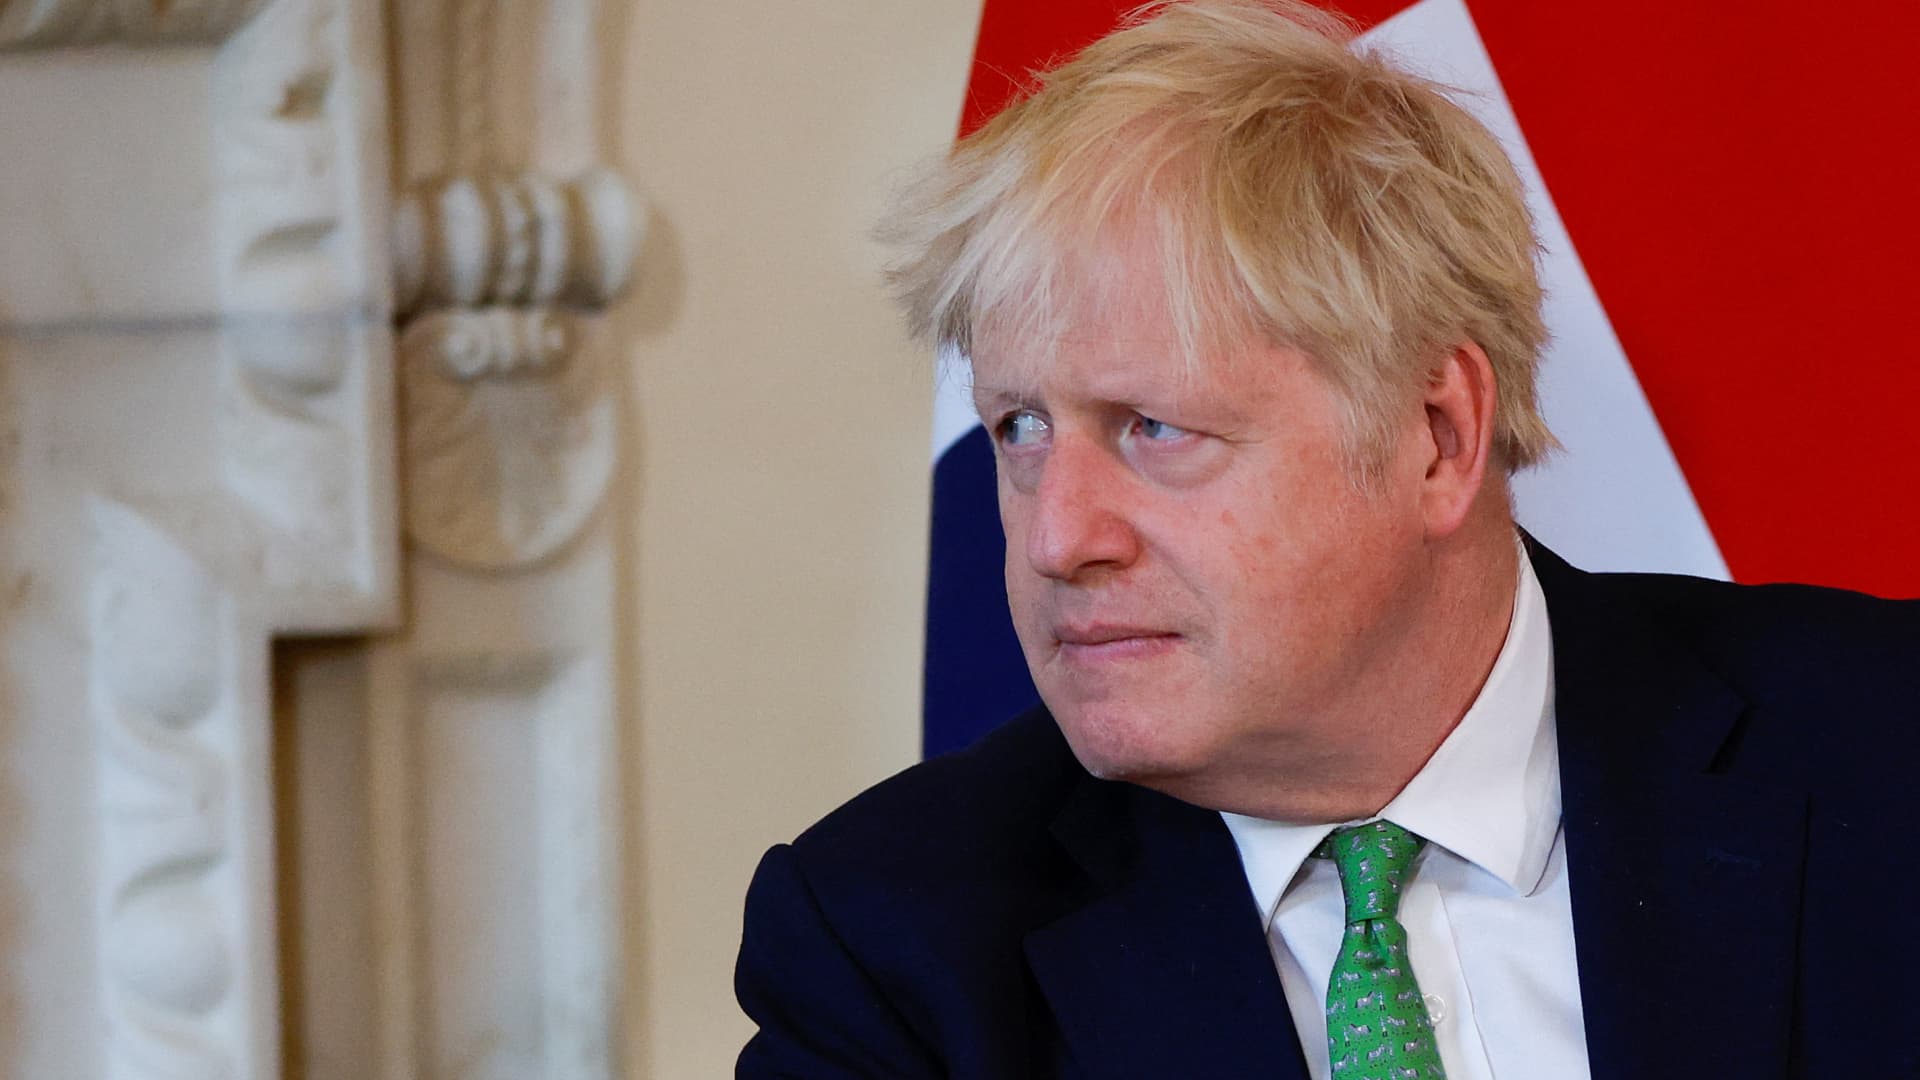 Boris Johnson’s leadership hangs by a thread after top resignations